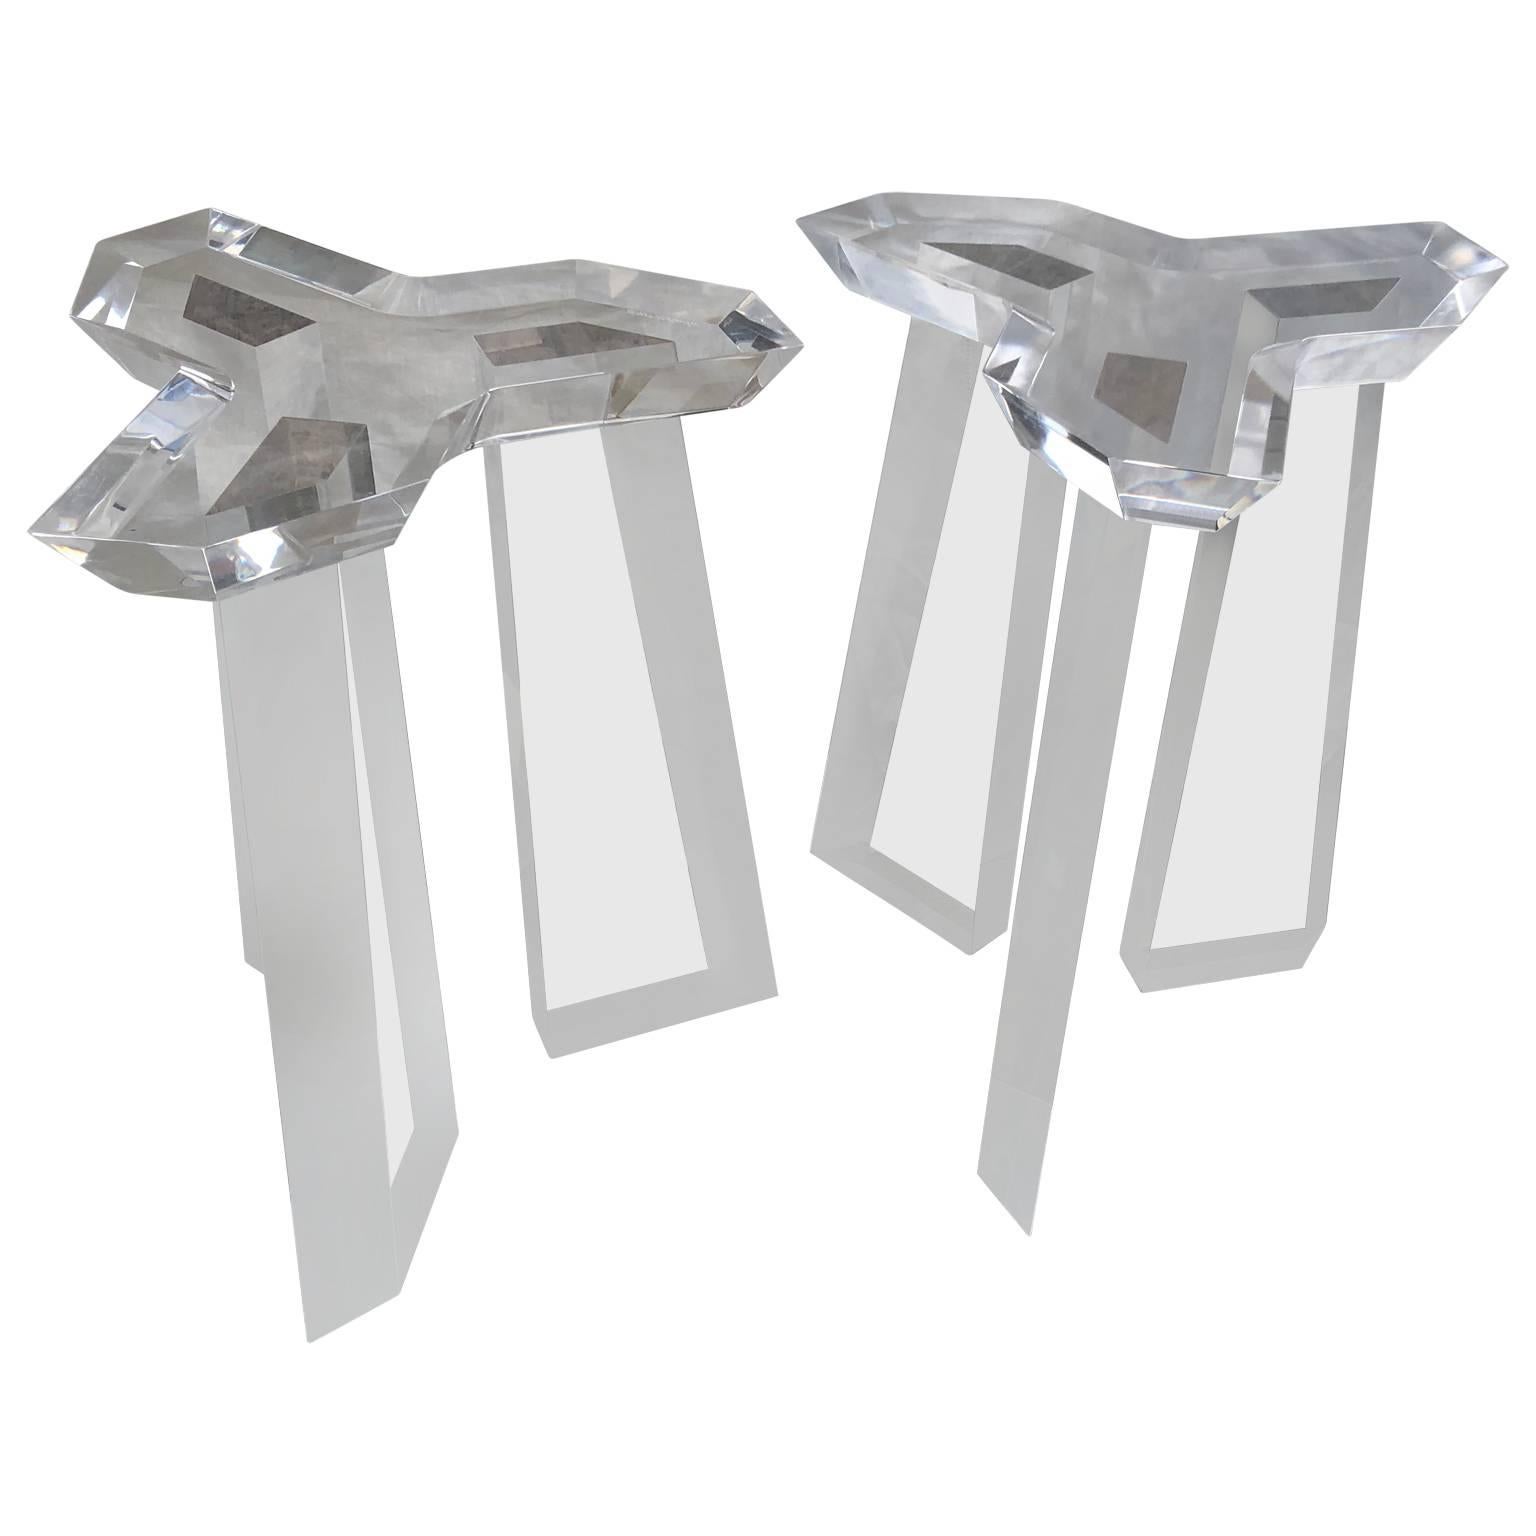 Pair Of Thick Lucite End Tables or Lucite Dining Table Base, By Loznikov